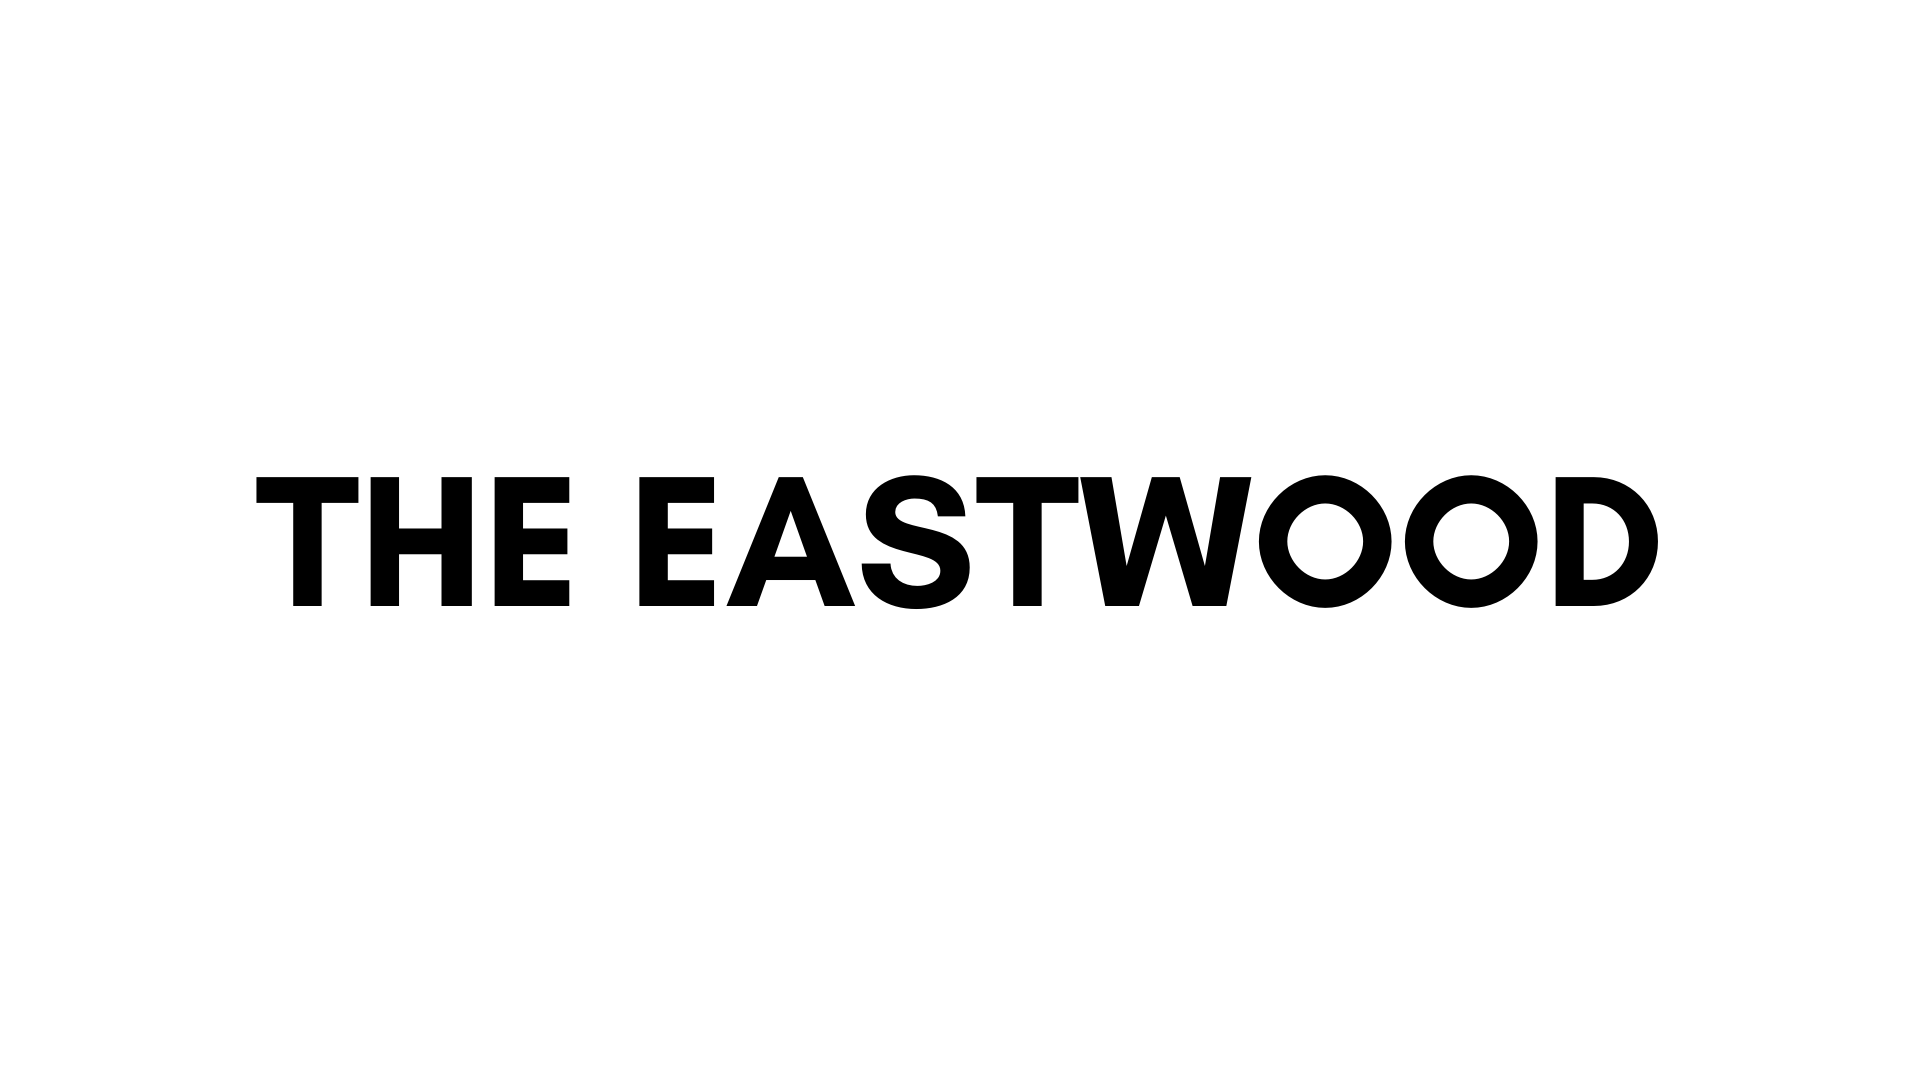 THE EASTWOOD